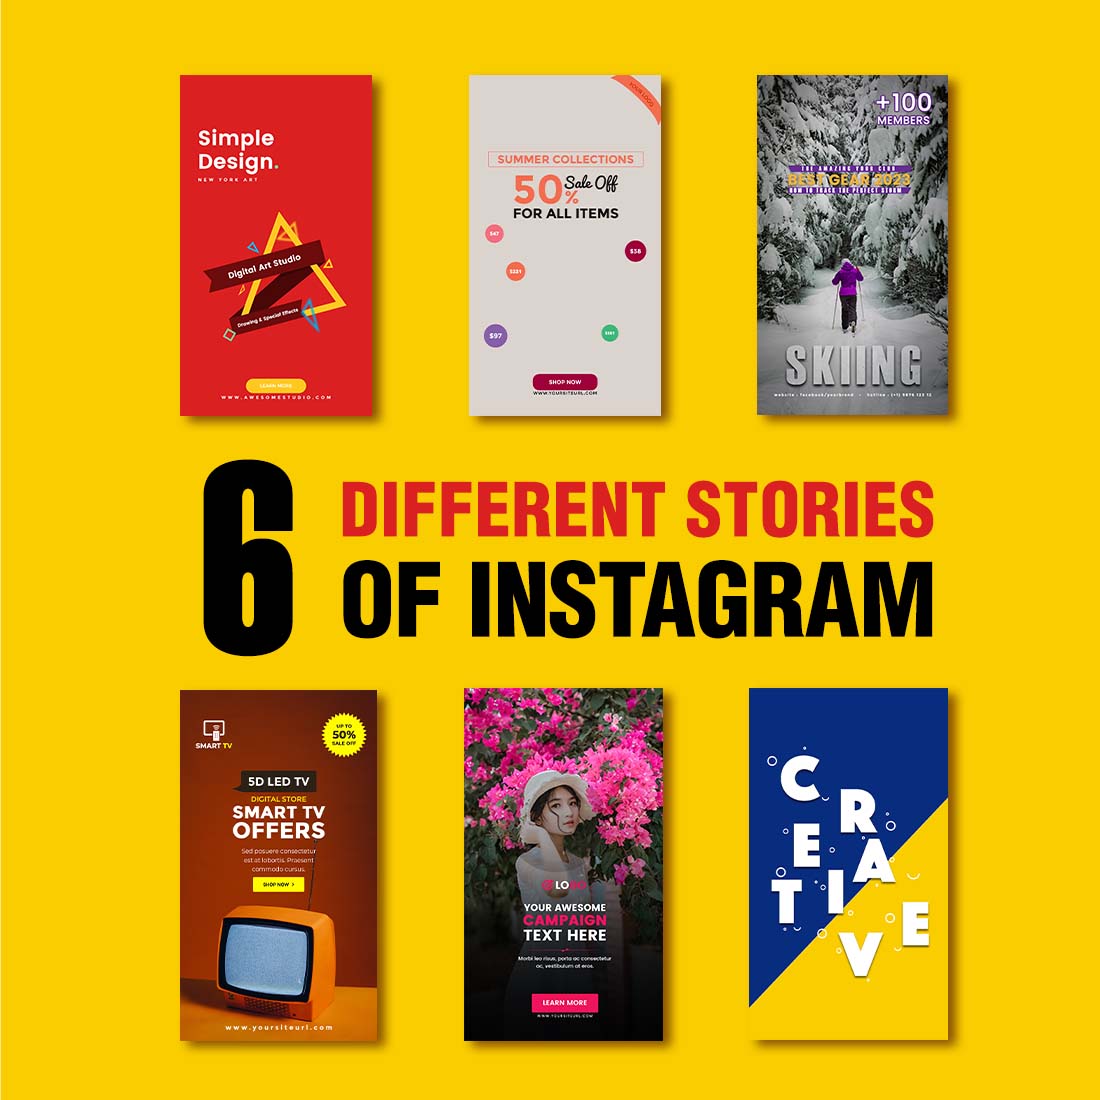 Pack Collection of Instagram Stories & Highlights cover iamge.